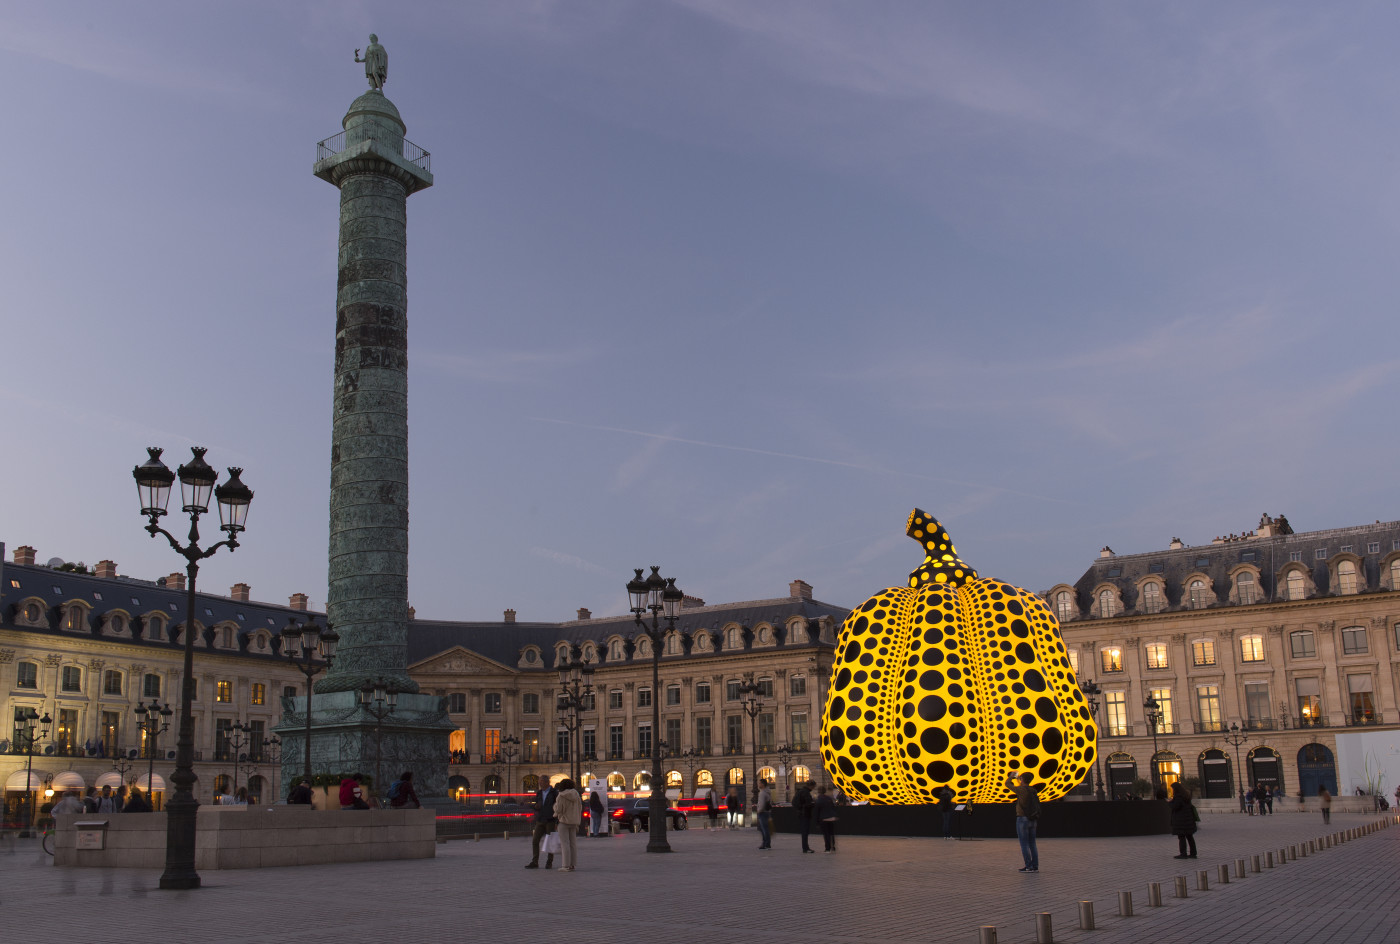 A major public work by Yayoi Kusama conceived for Place Vendôme